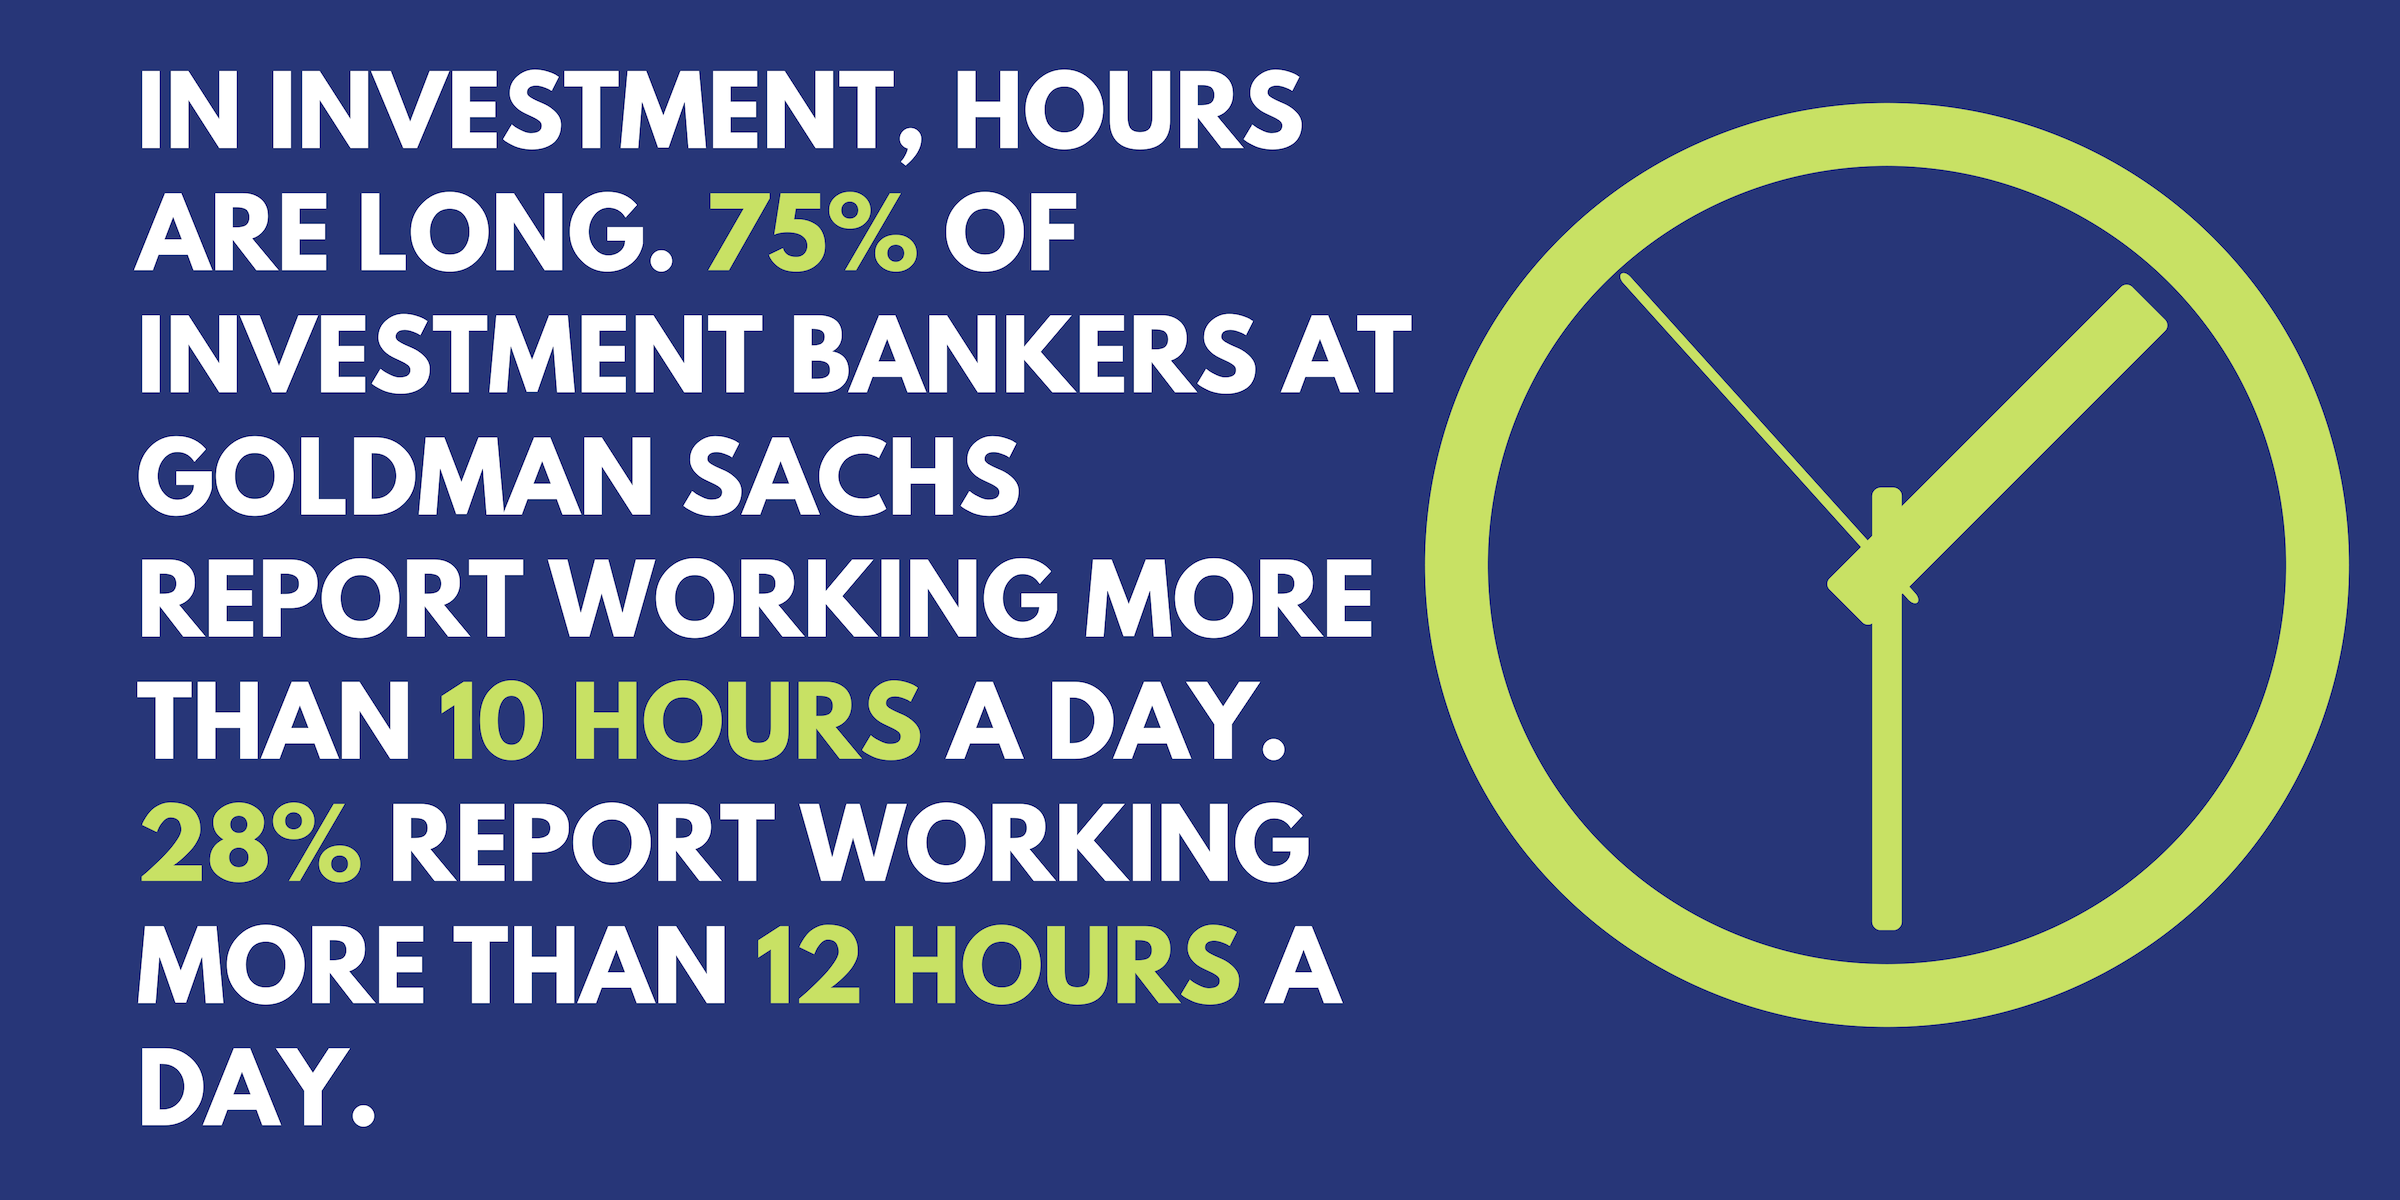 In investments, hours are long. 75% of investment bankers at Goldman Sachs report working more than 10 hours a day. 28% report working more than 12 hours a day.